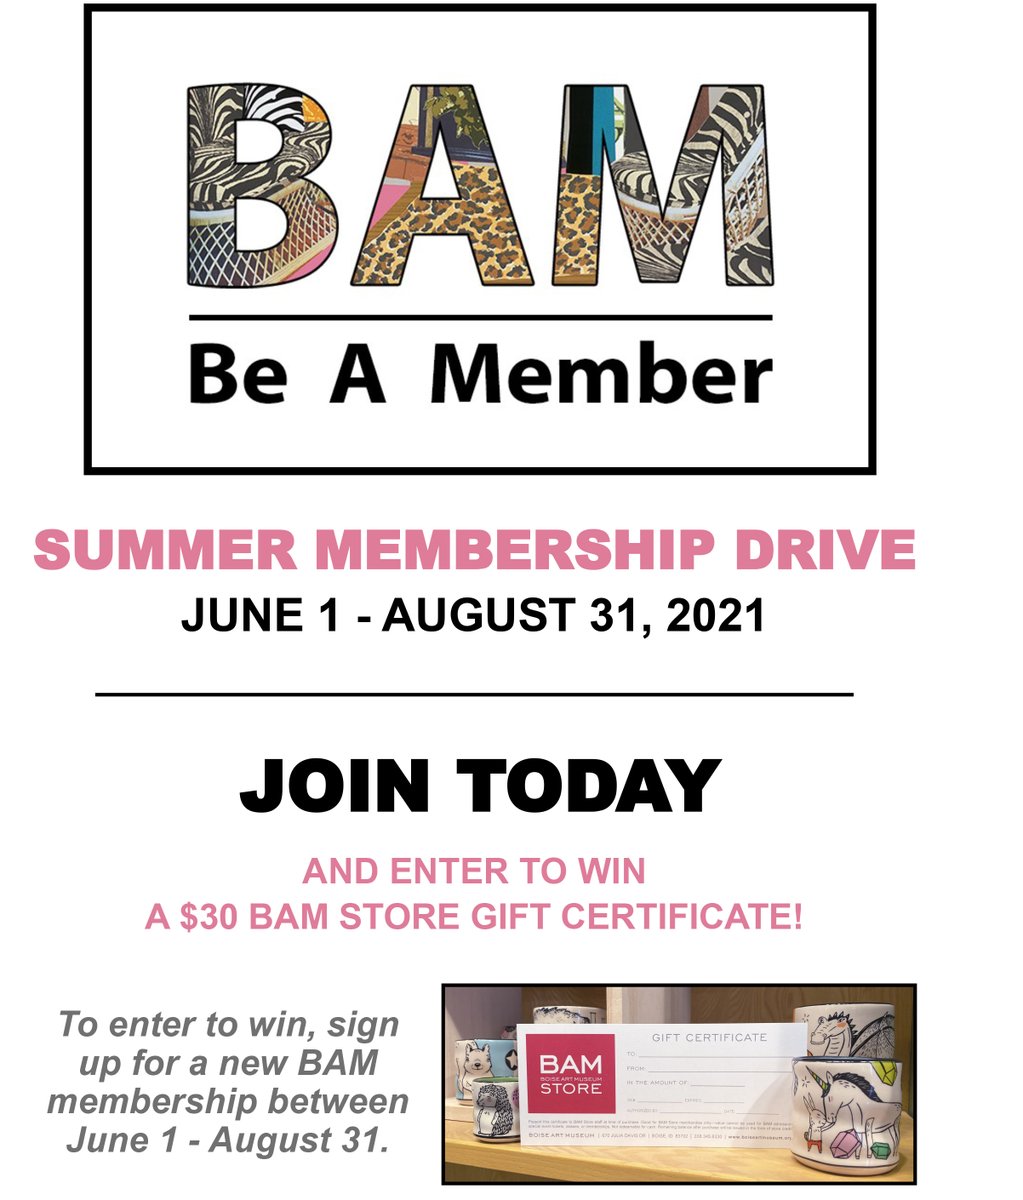 Boise Art Museum On Twitter Become A Bam Member By 8 31 For The Chance To Win A Bam Store Gift Card You Ll Enjoy The Many Benefits Of Membership For An Entire Year